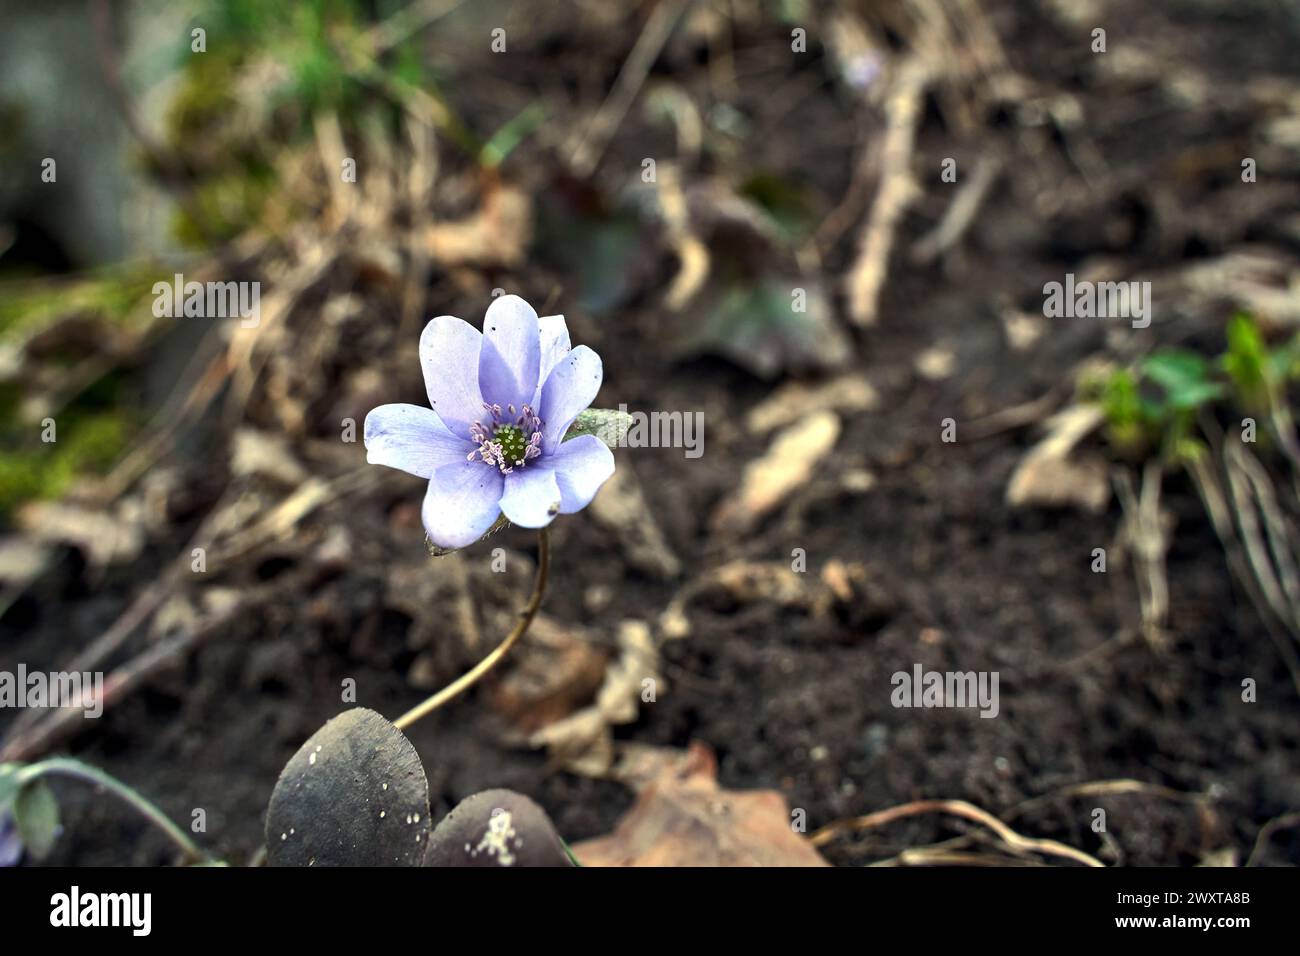 hepatica - purple flower in early spring in the forest, Poland Stock Photo